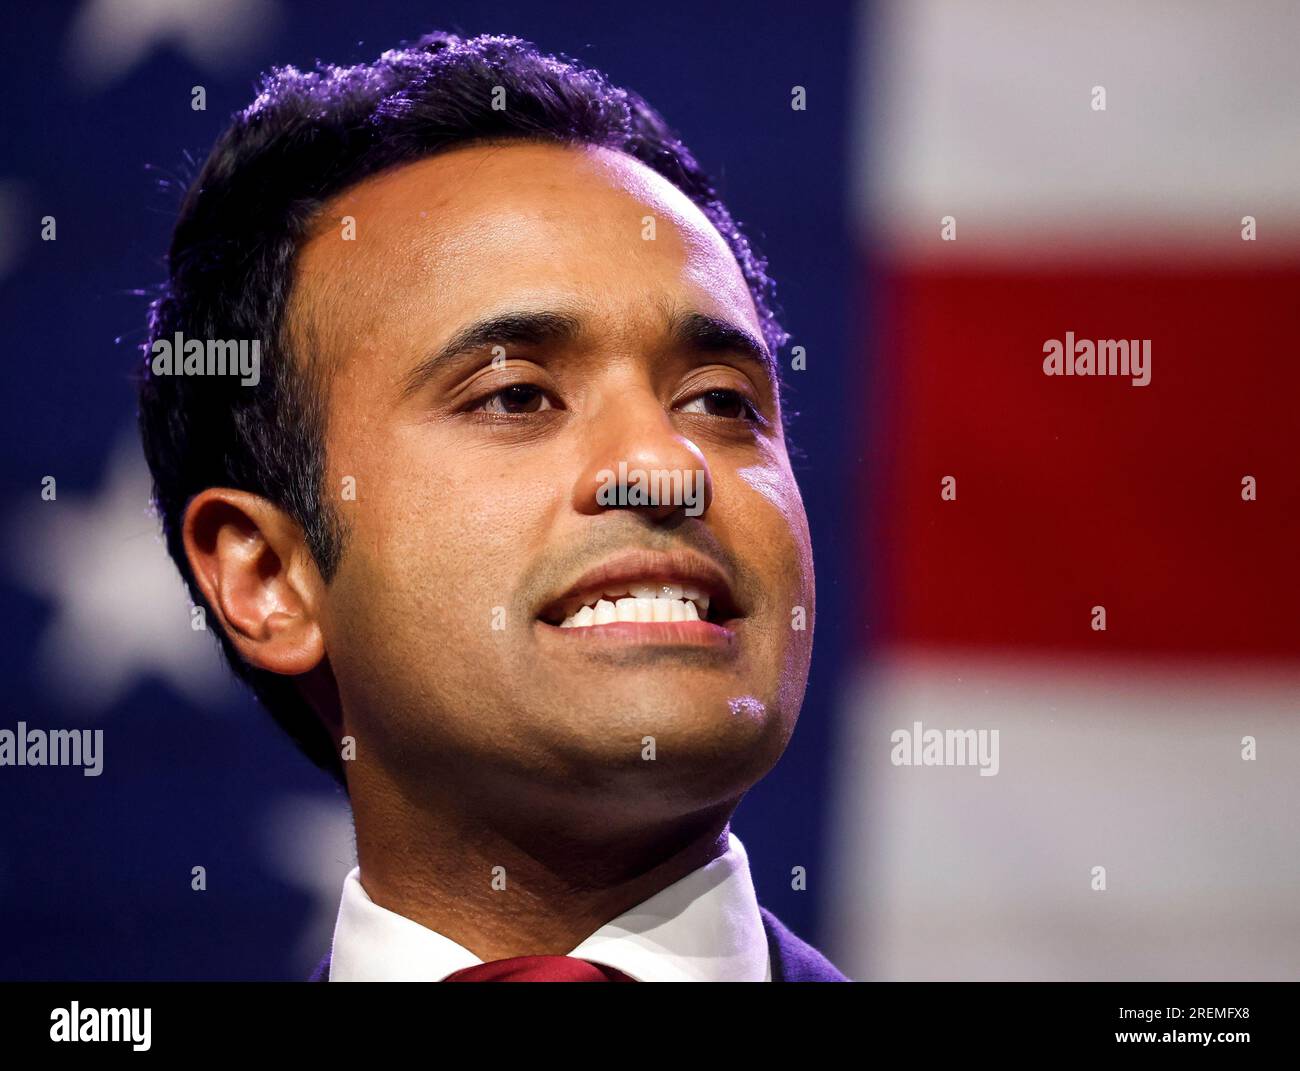 Des Moines, USA. 28th July, 2023. Republican presidential candidate Vivek Ramaswamy speaks at the 2023 Republican Party of Iowa Lincoln Dinner in Des Moines, Iowa, Friday, July 28 2023. Republican candidates for US President made pitches for their respective candidacies at the gathering in Iowa which will hold the First-in-the-Nation Caucus. Photo by Tannen Maury/UPI Credit: UPI/Alamy Live News Stock Photo